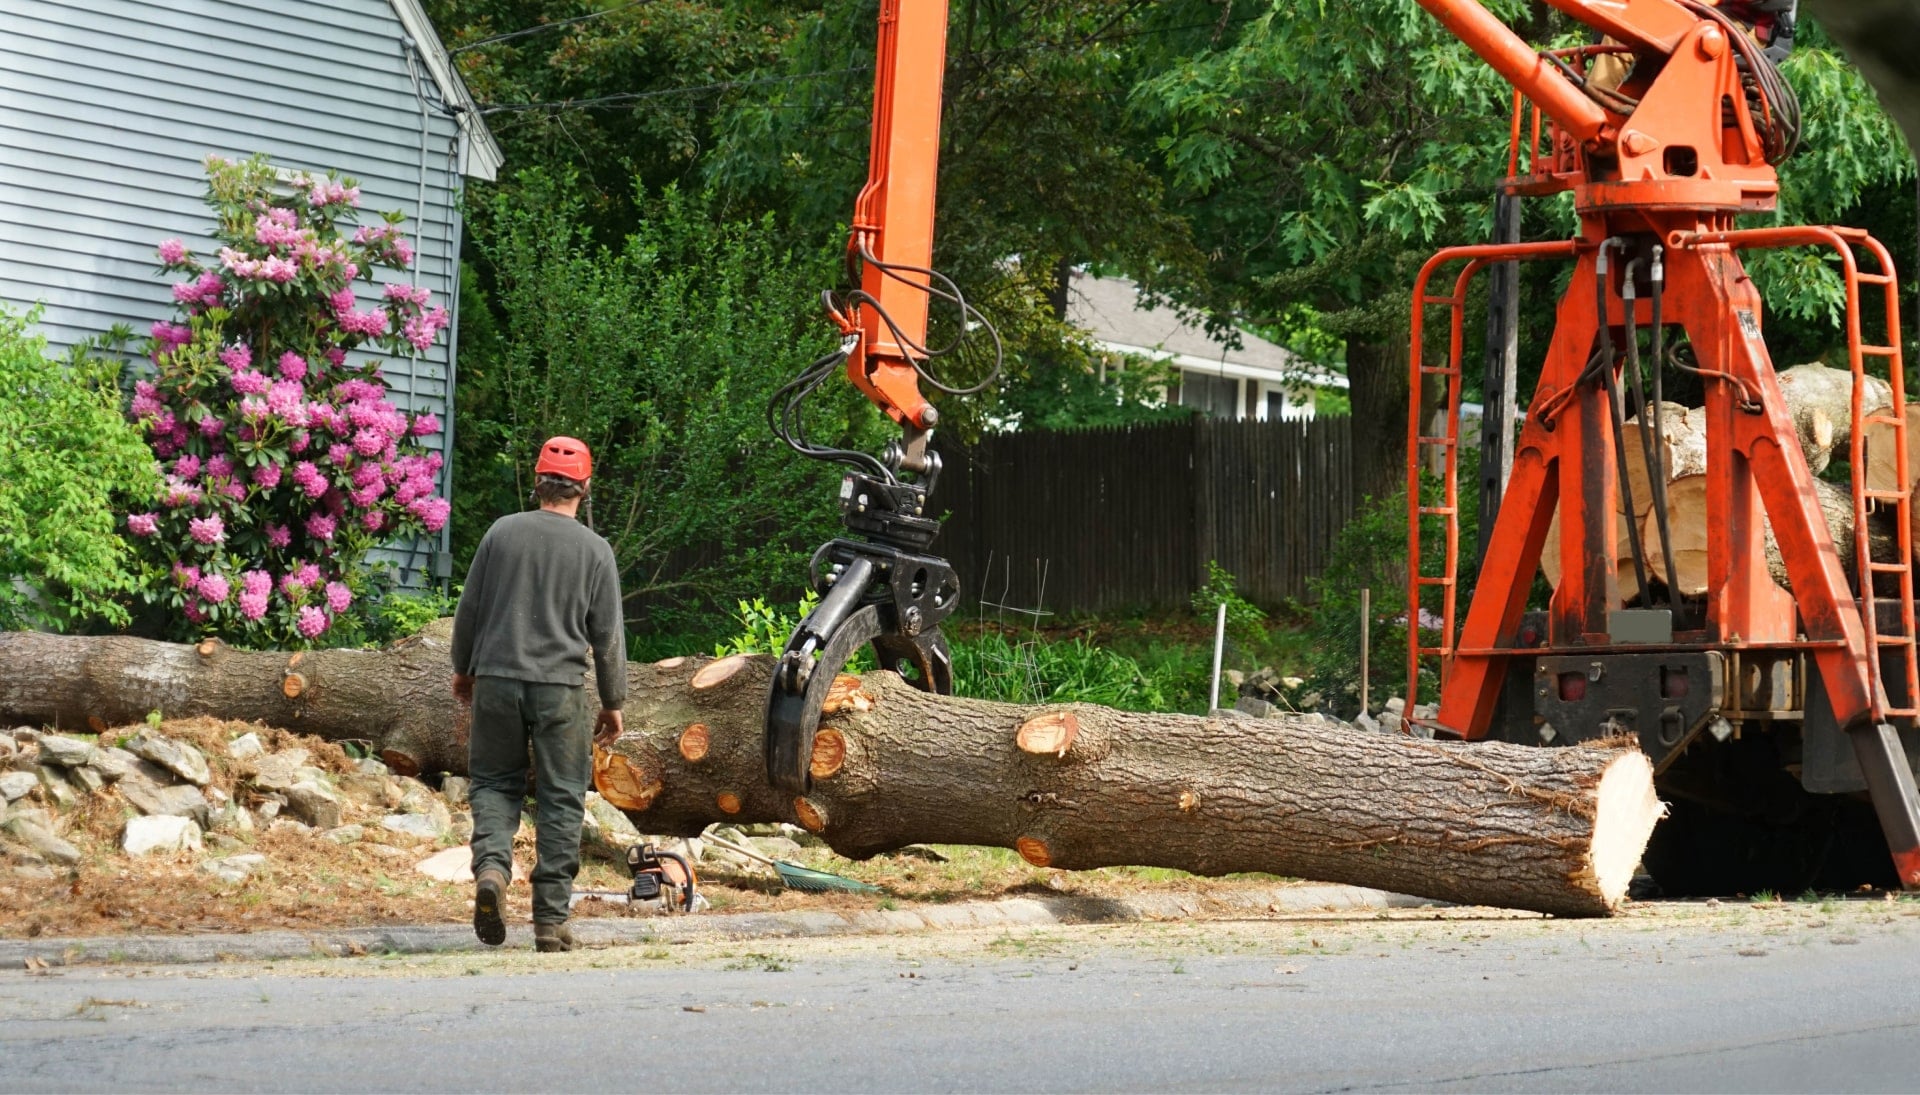 Local partner for Tree removal services in New Orleans